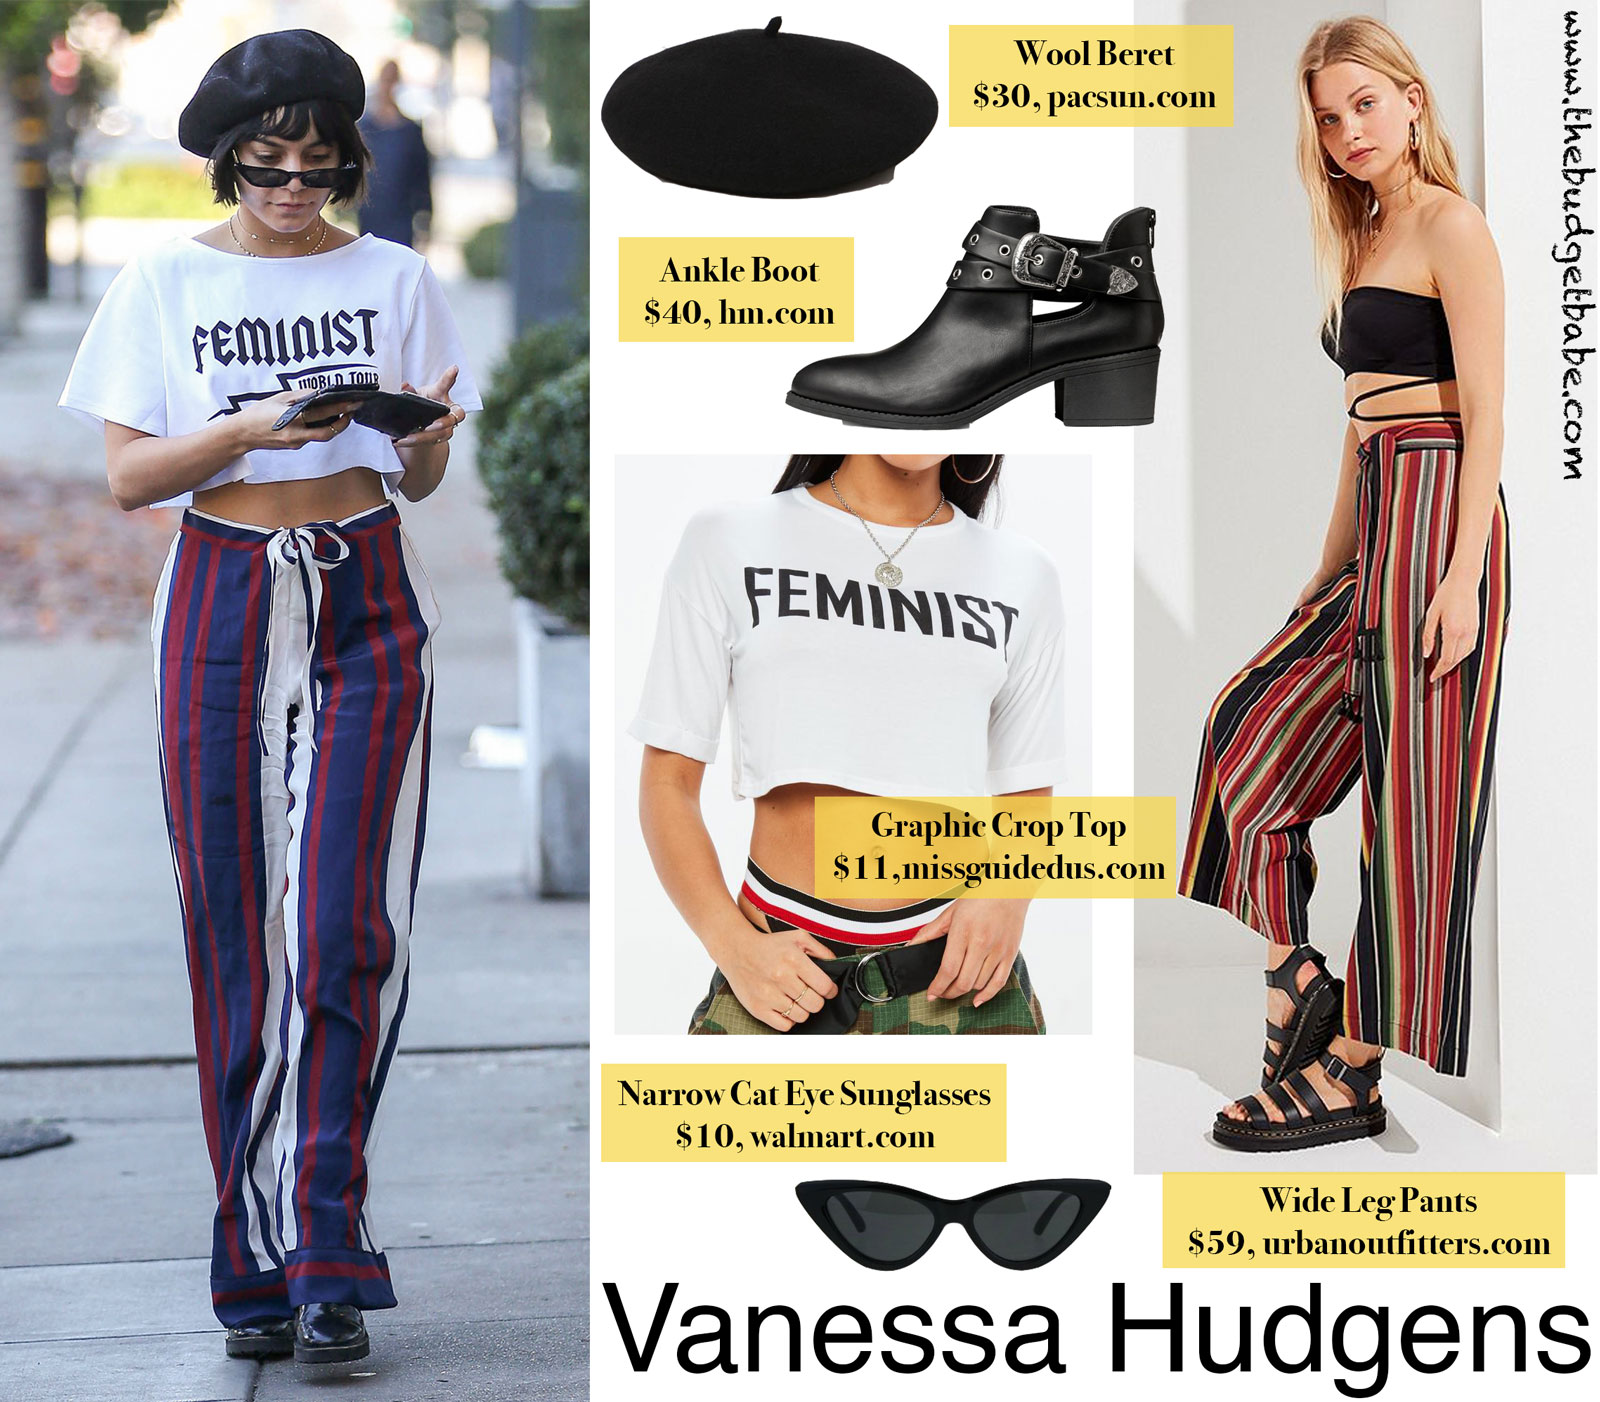 Vanessa Hudgens' Feminist Crop Top and Striped Pants Look for Less